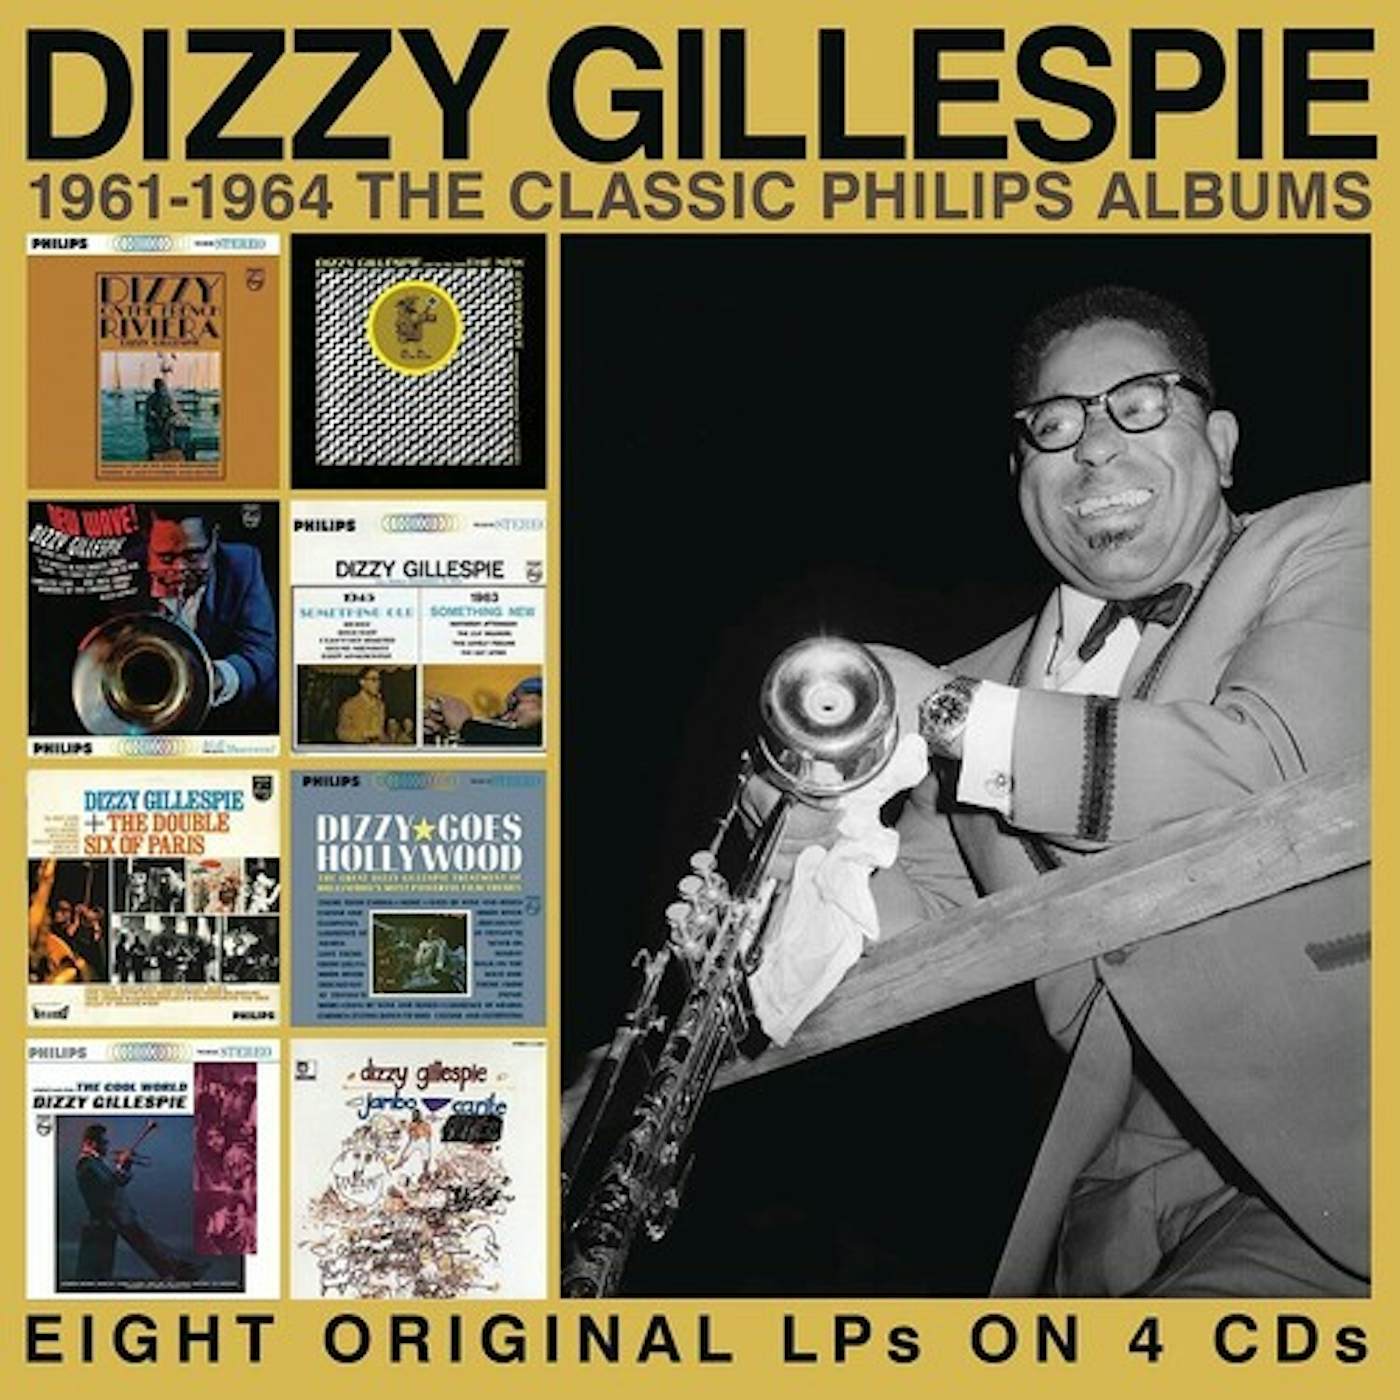 Dizzy Gillespie 1961-1964: THE CLASSIC PHILIPS ALBUMS CD